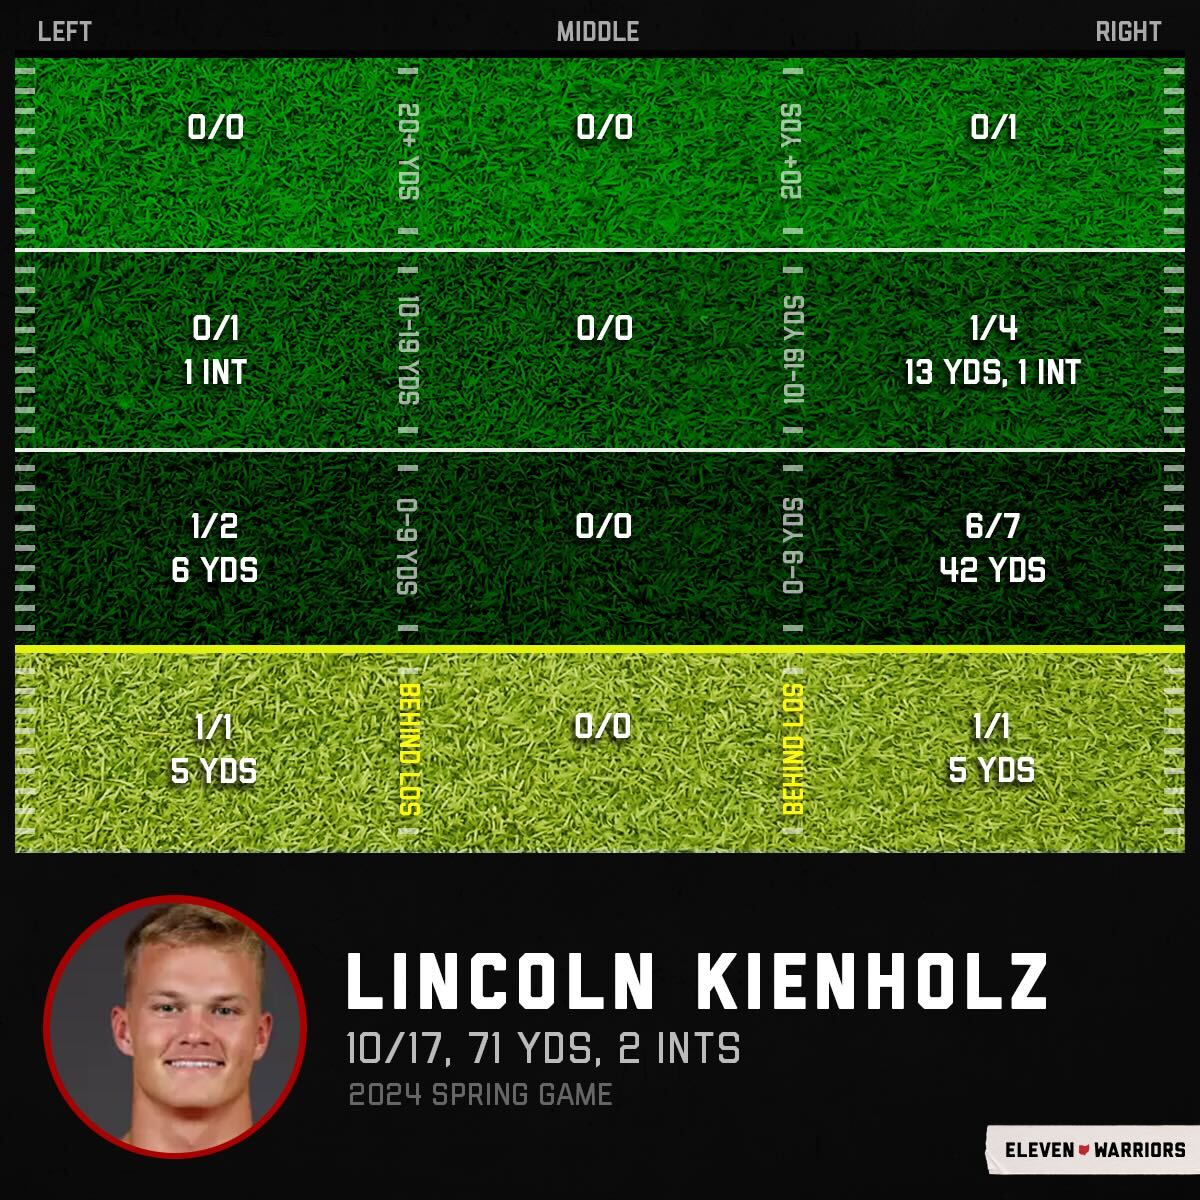 Lincoln Kienholz's passing chart in the 2024 spring game